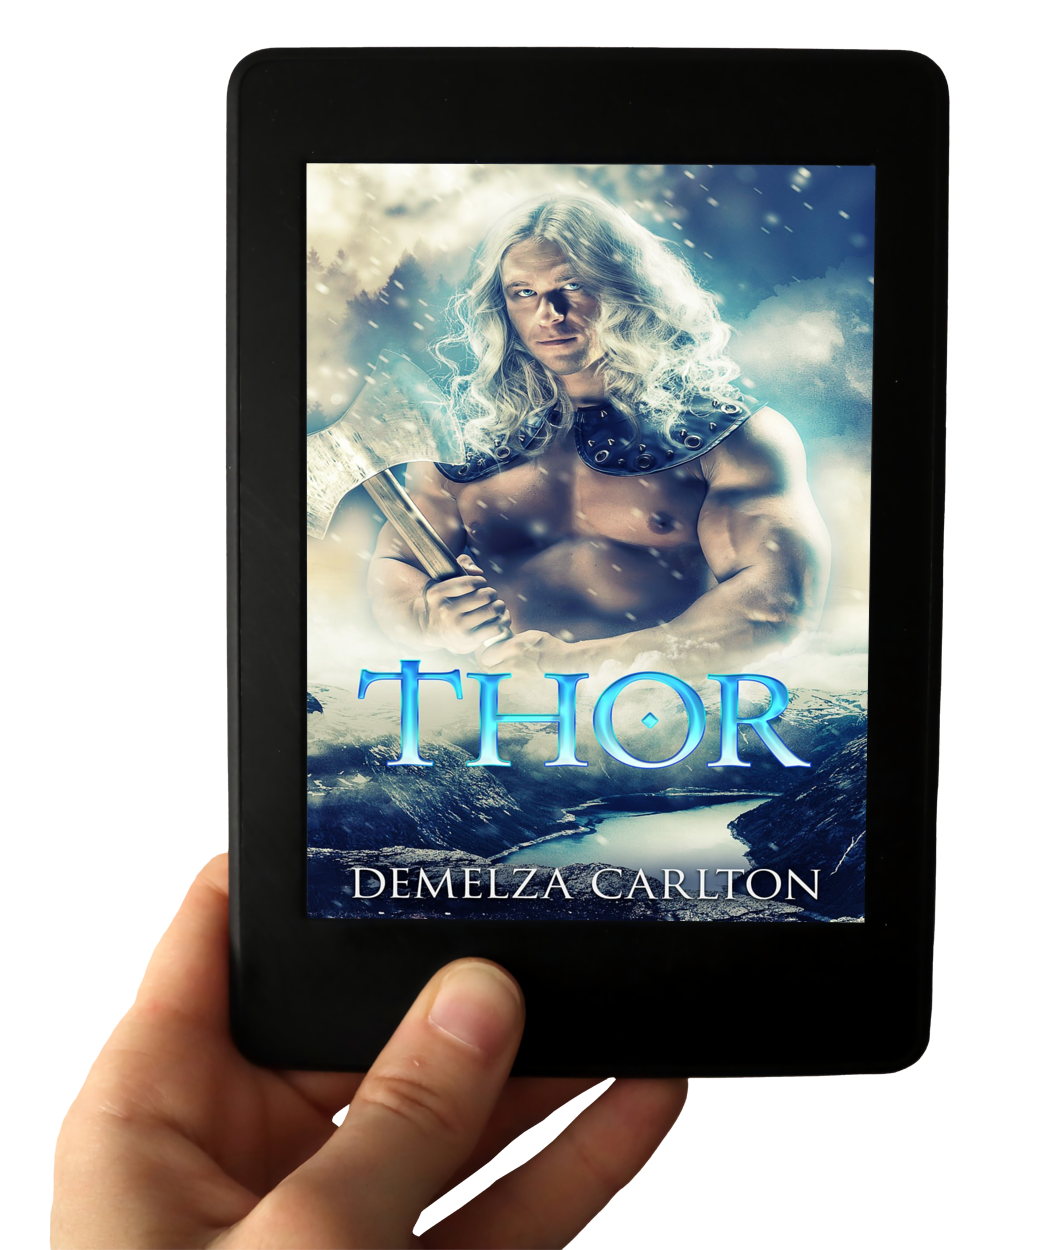  A steamy Viking paranormal protector gargoyle monster romance tale for fans of Sarah J Maas, ACOTAR, Rebecca Yarros and Charlaine Harris